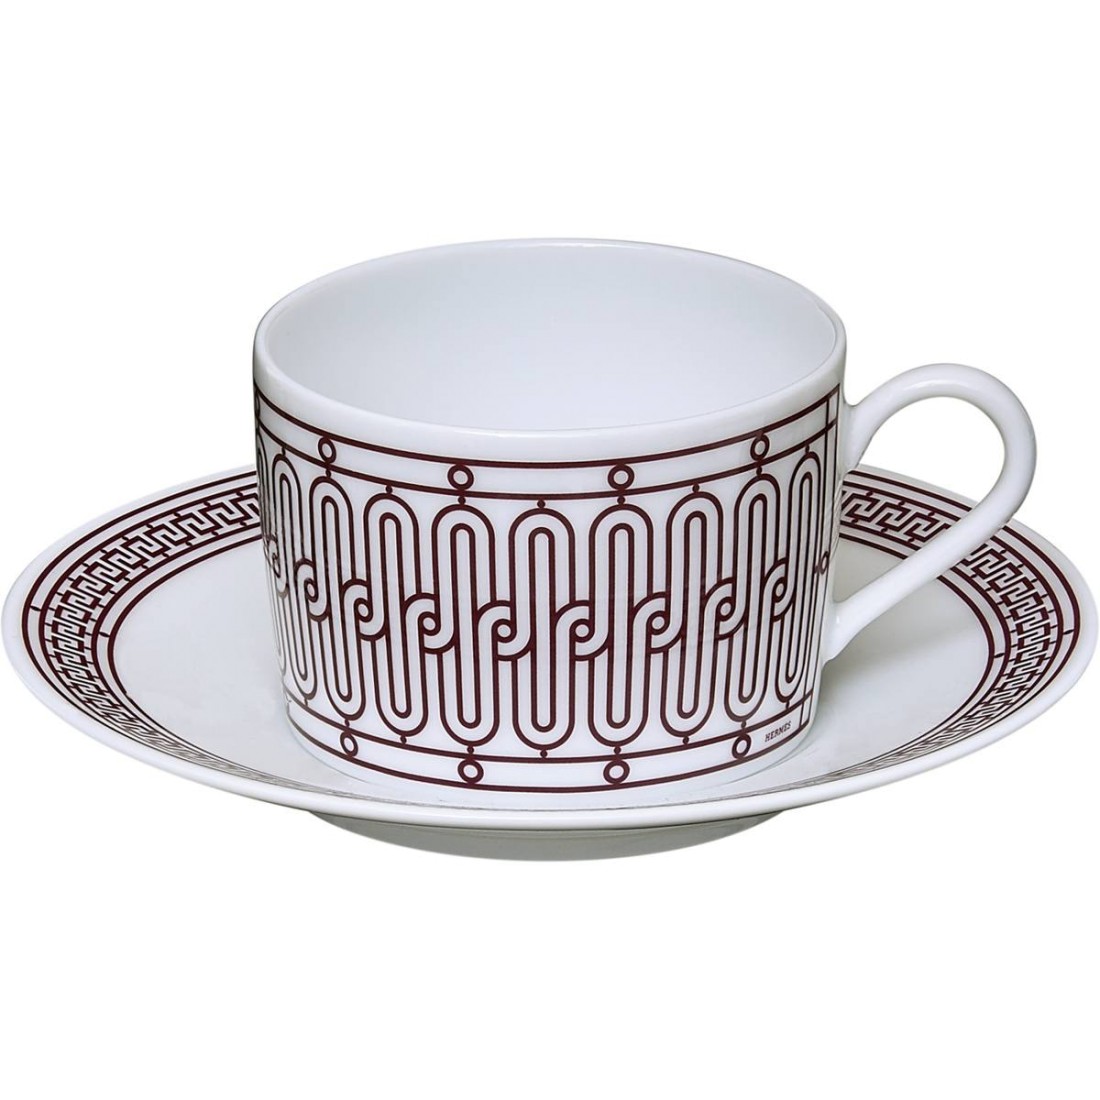 H Deco tea cup and saucer